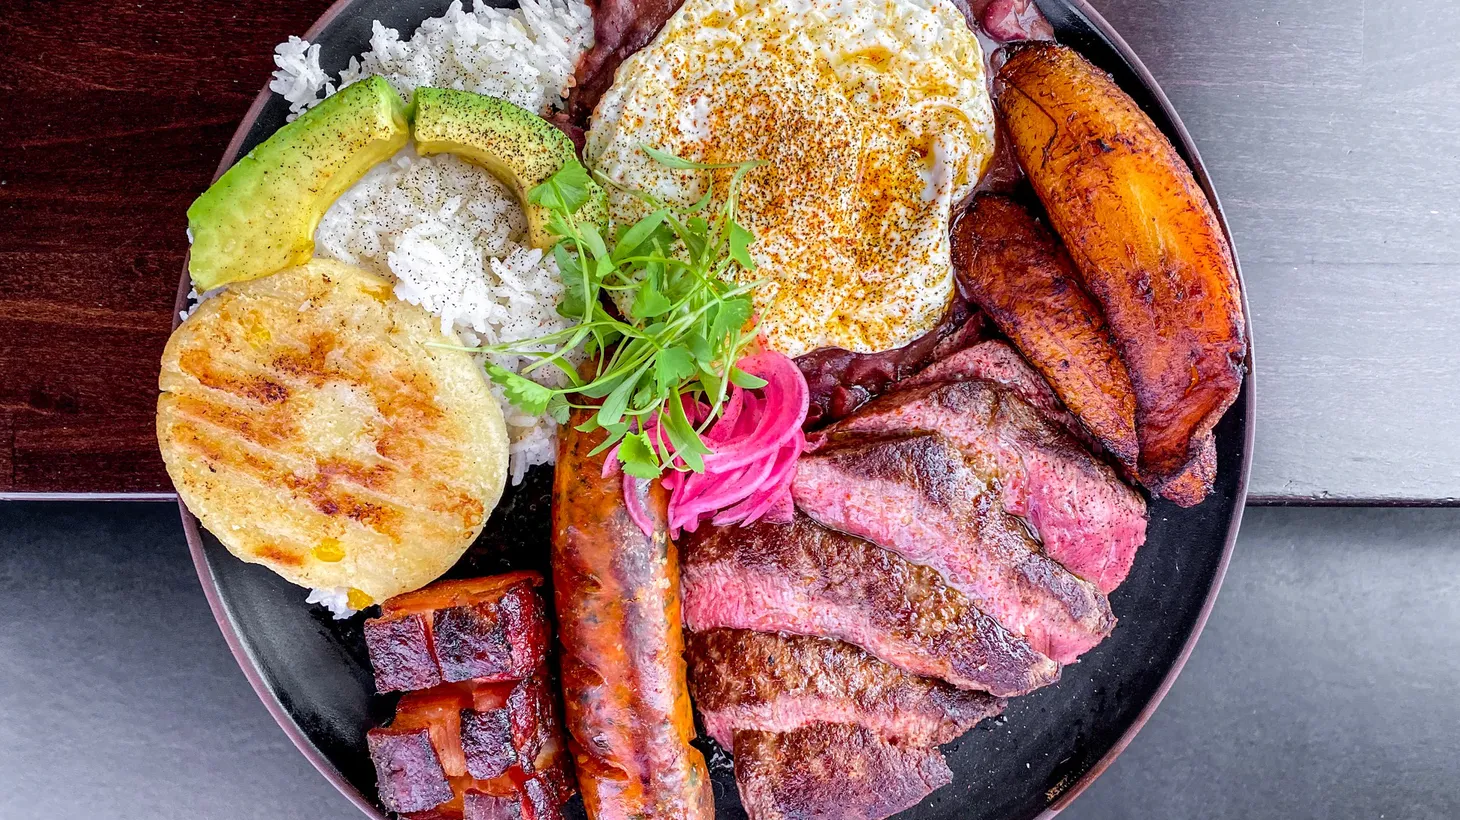 A classic Colombian dish, LA Times restaurant critic Bill Addison suggests building a meal around the bandeja paisa at Selva, a restaurant that opened in Long Beach earlier this year.